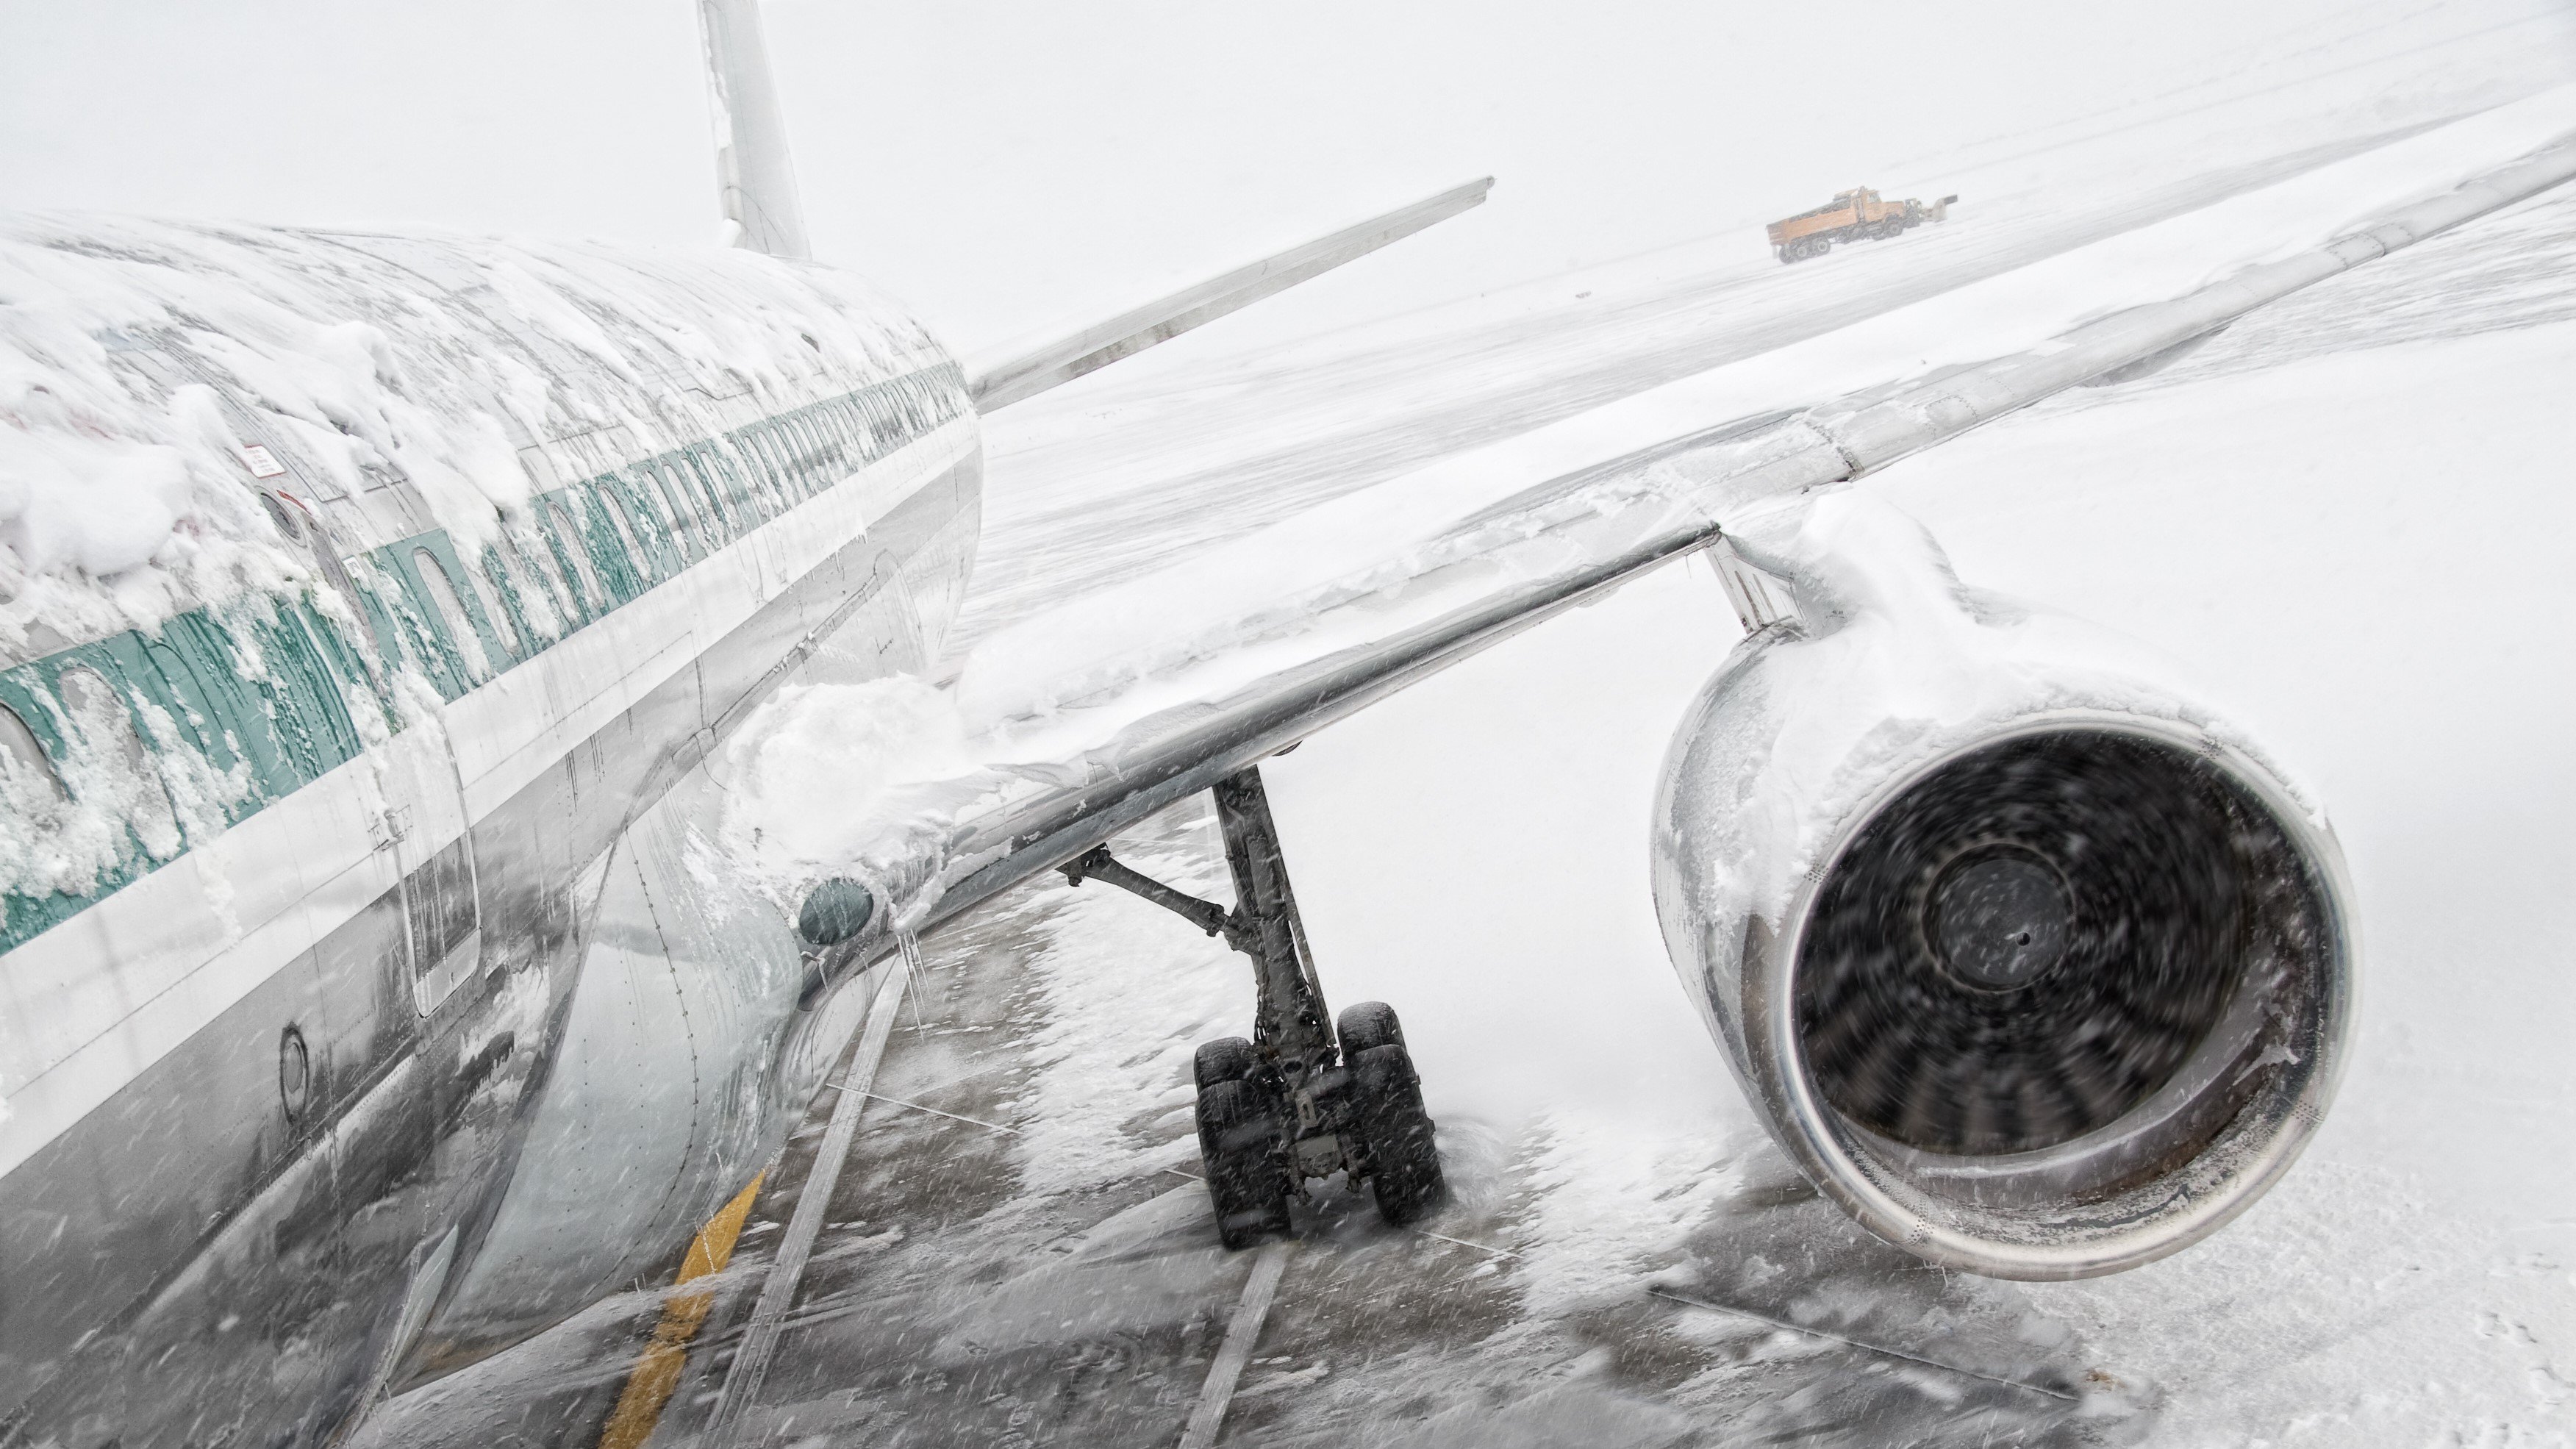 snowy plane snow storm airplane airport stall frozen